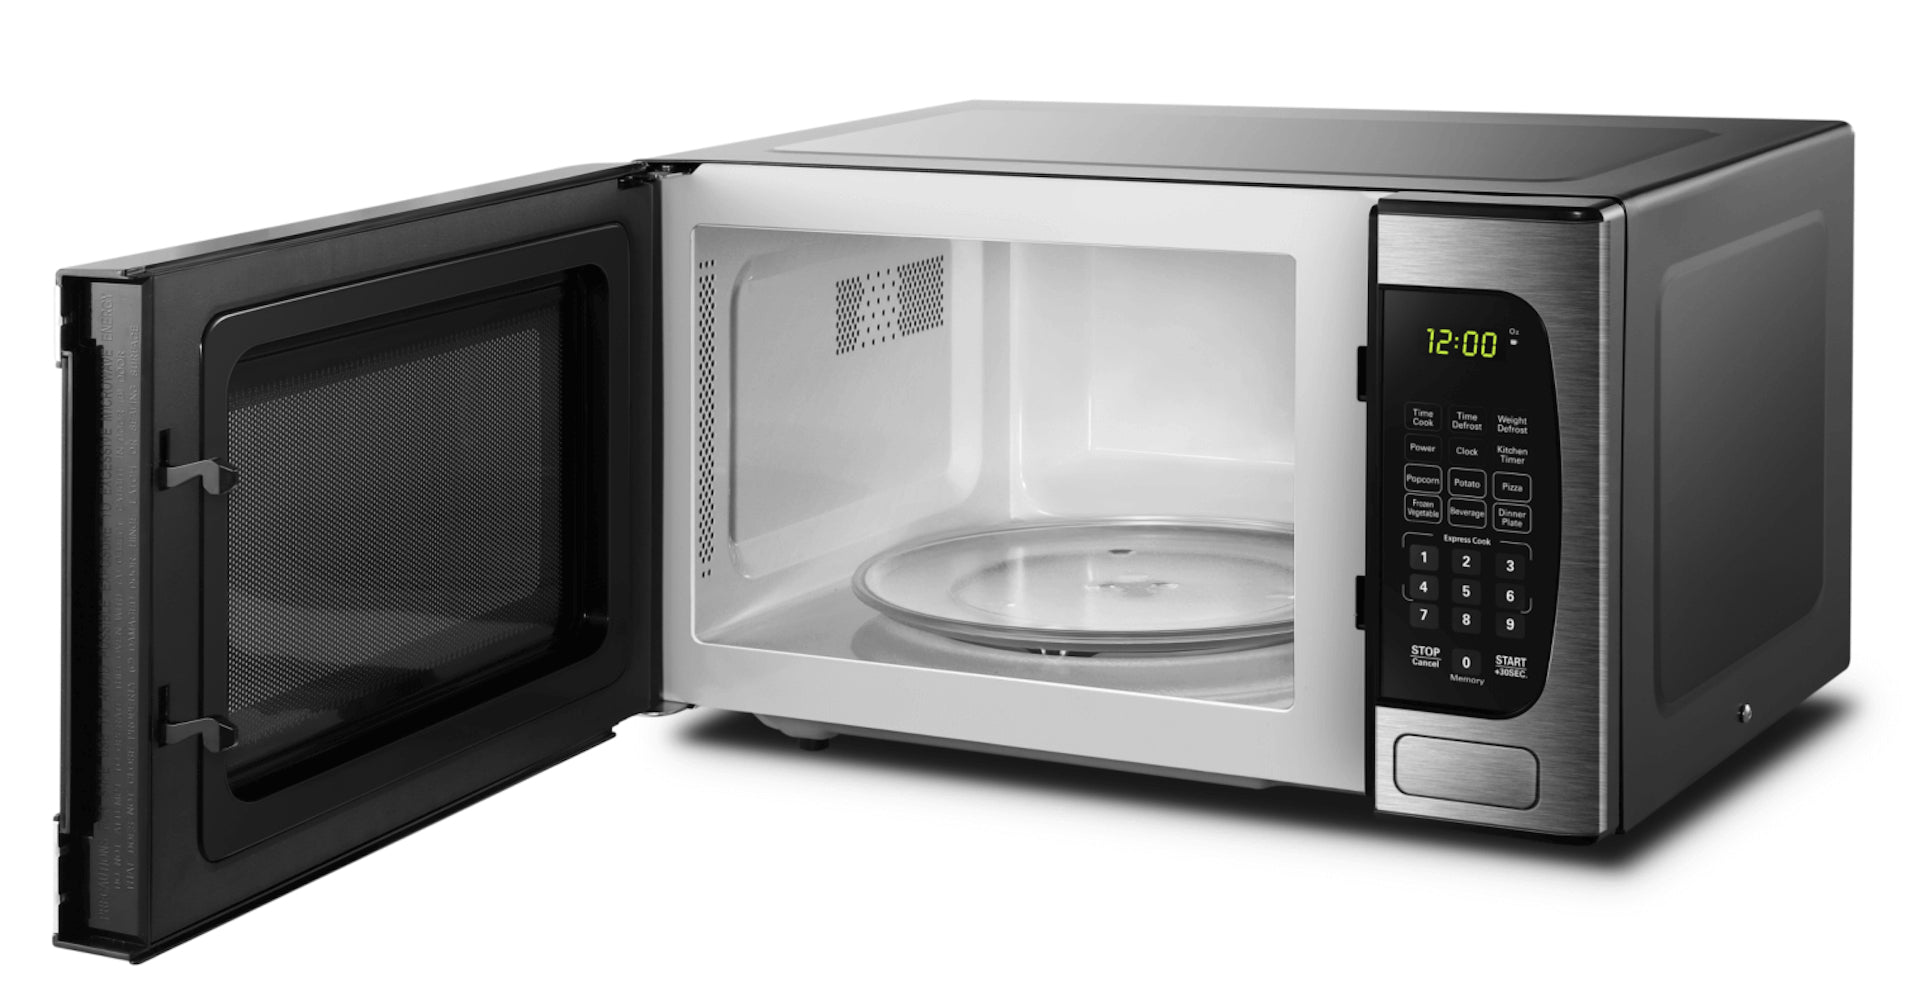 Danby - 0.9 cu. Ft  Counter top Microwave in Stainless - DBMW0924BBS